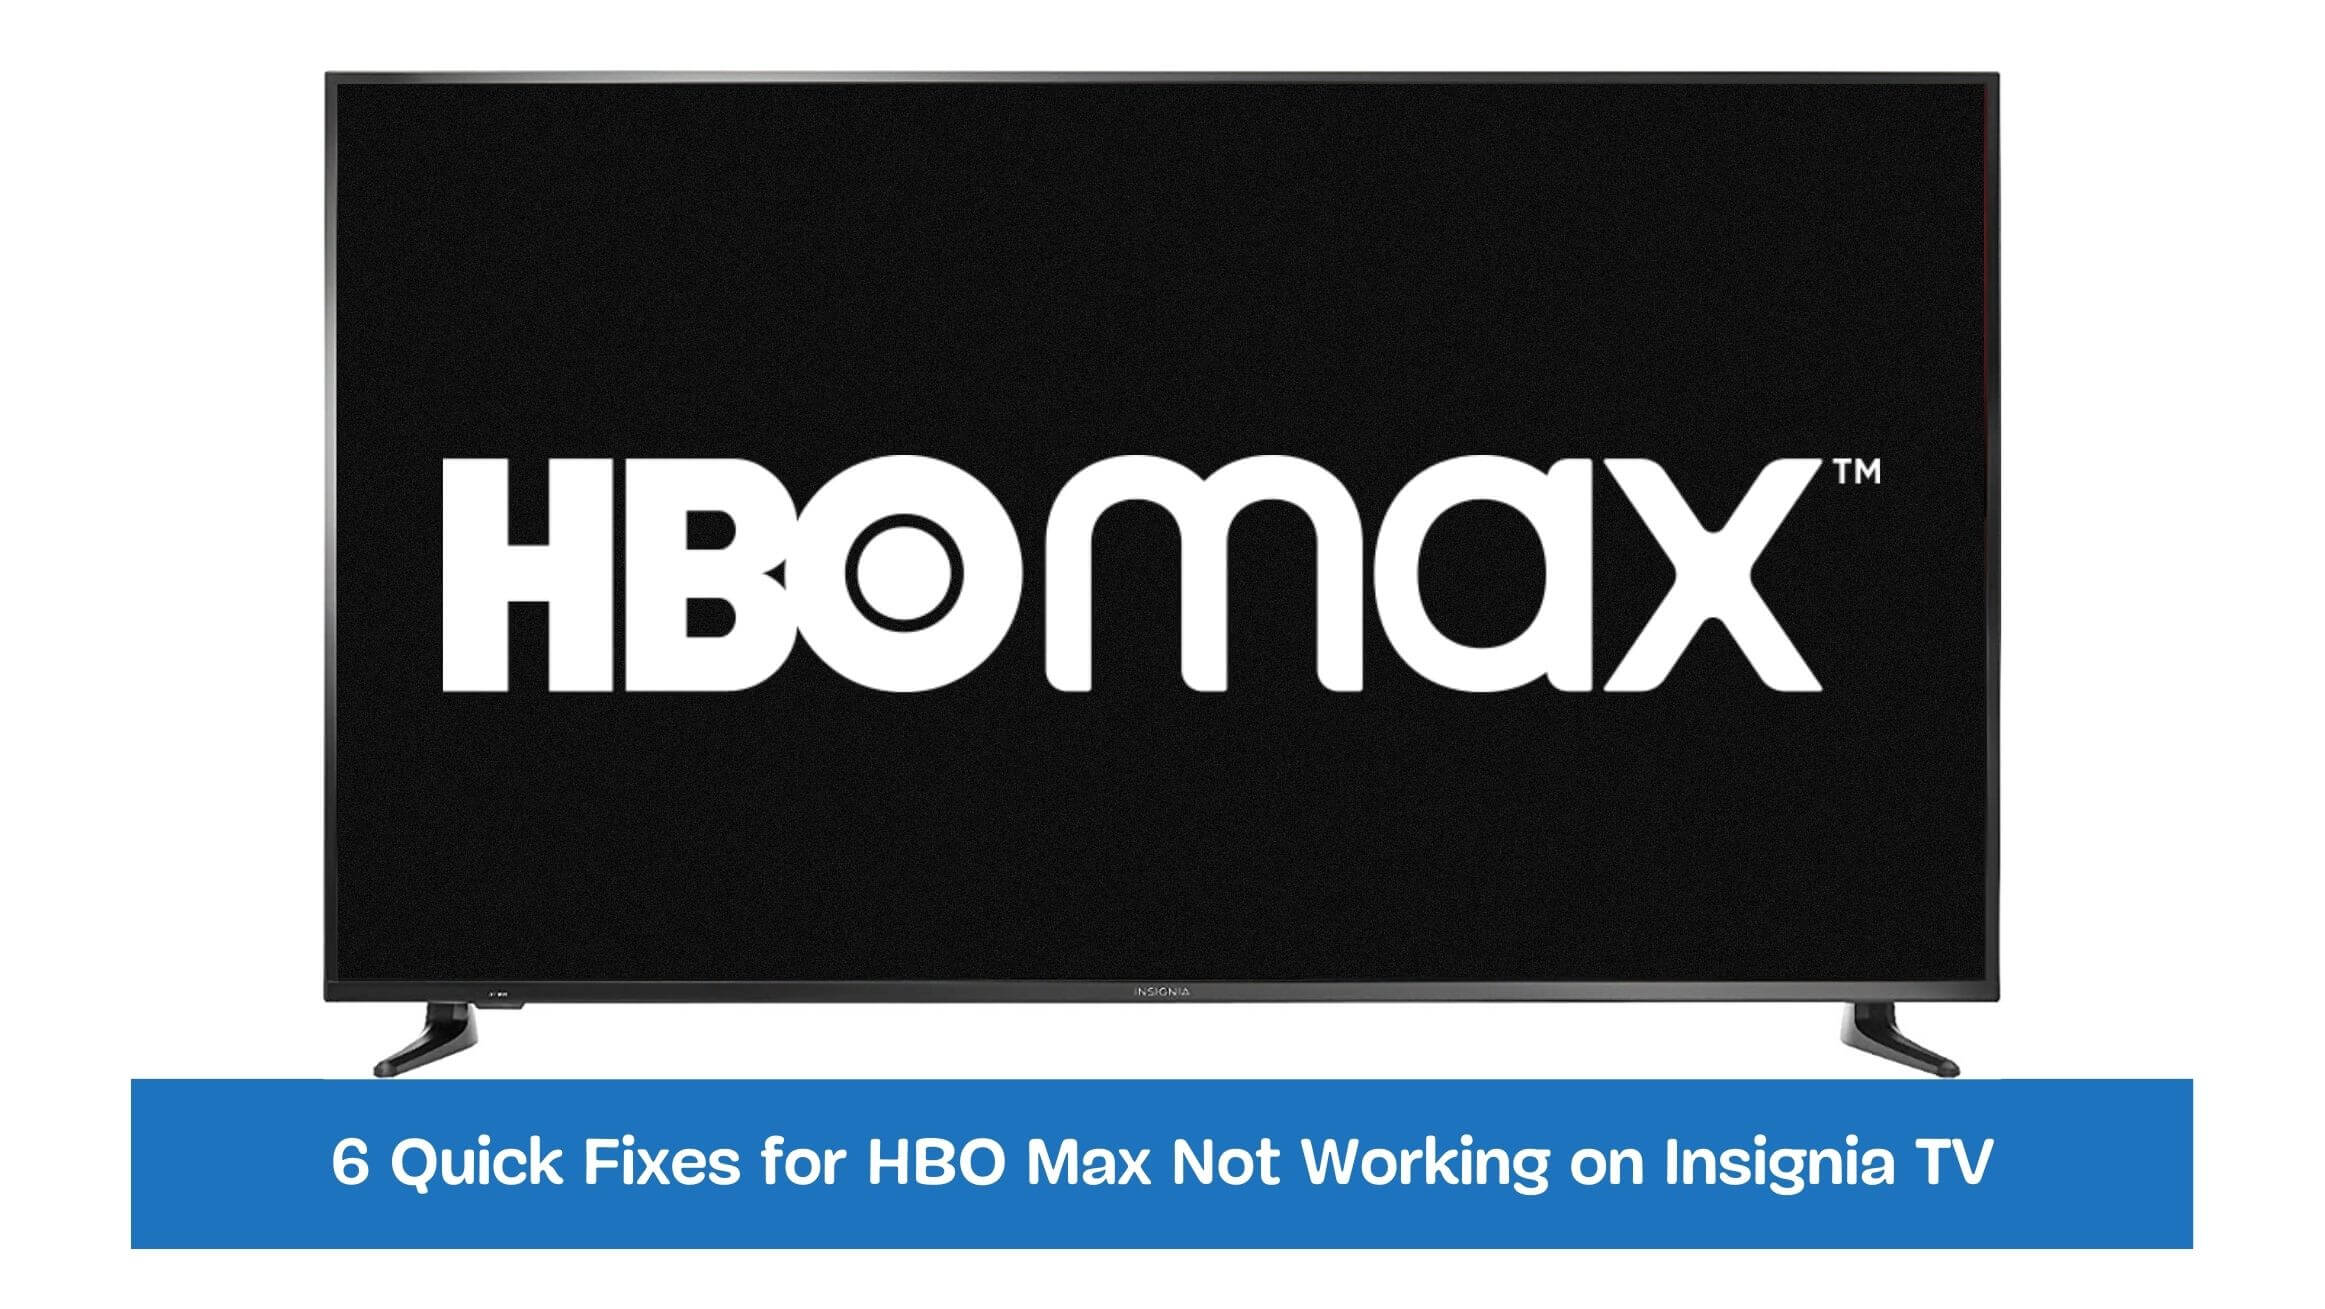 6 Quick Fixes for HBO Max Not Working on Insignia TV